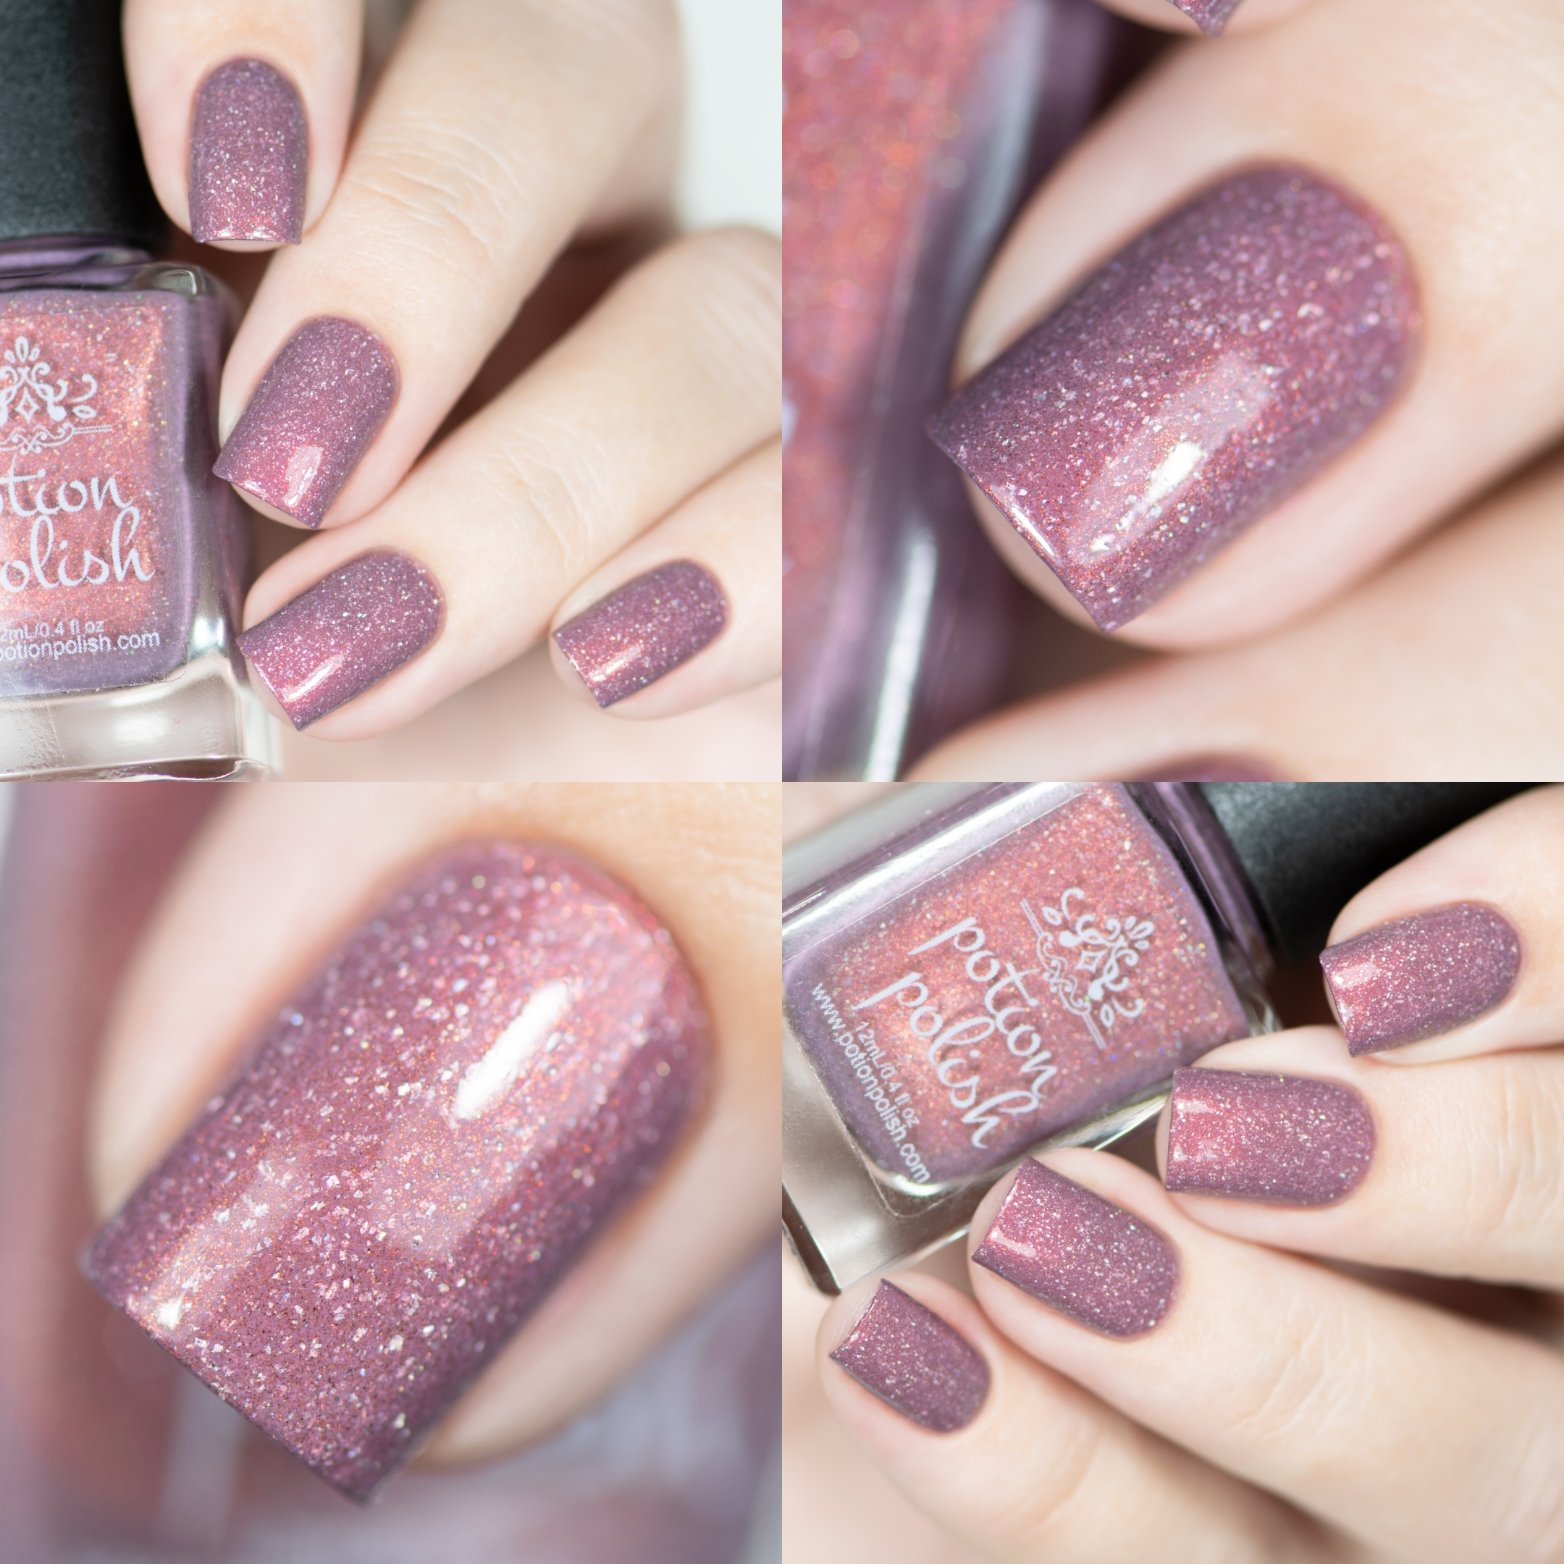 Review: Avon Mark Gel Shine Nail Enamel - Chrome and Holographic -  Adjusting Beauty